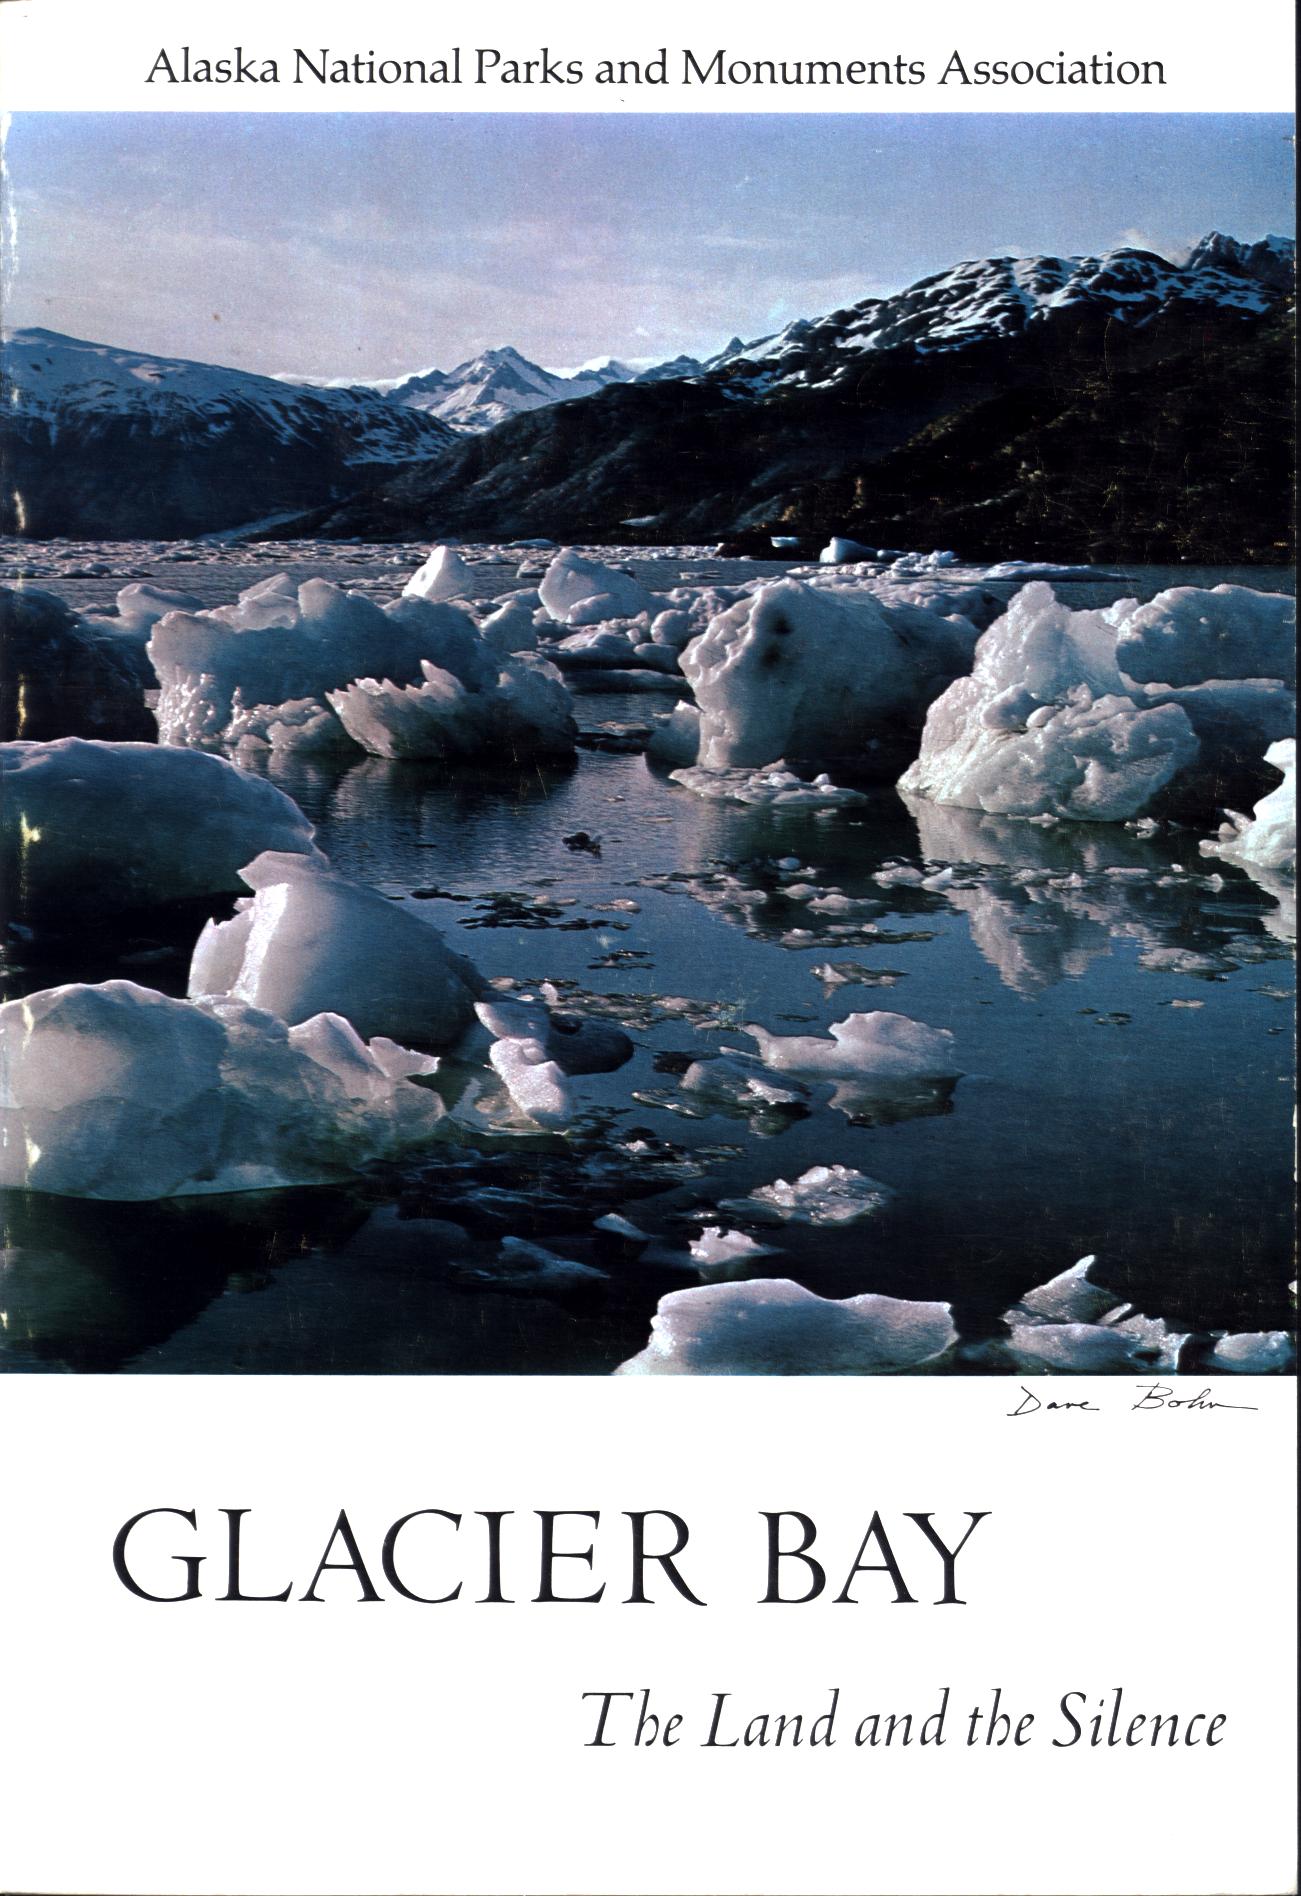 GLACIER BAY: the land and the silence